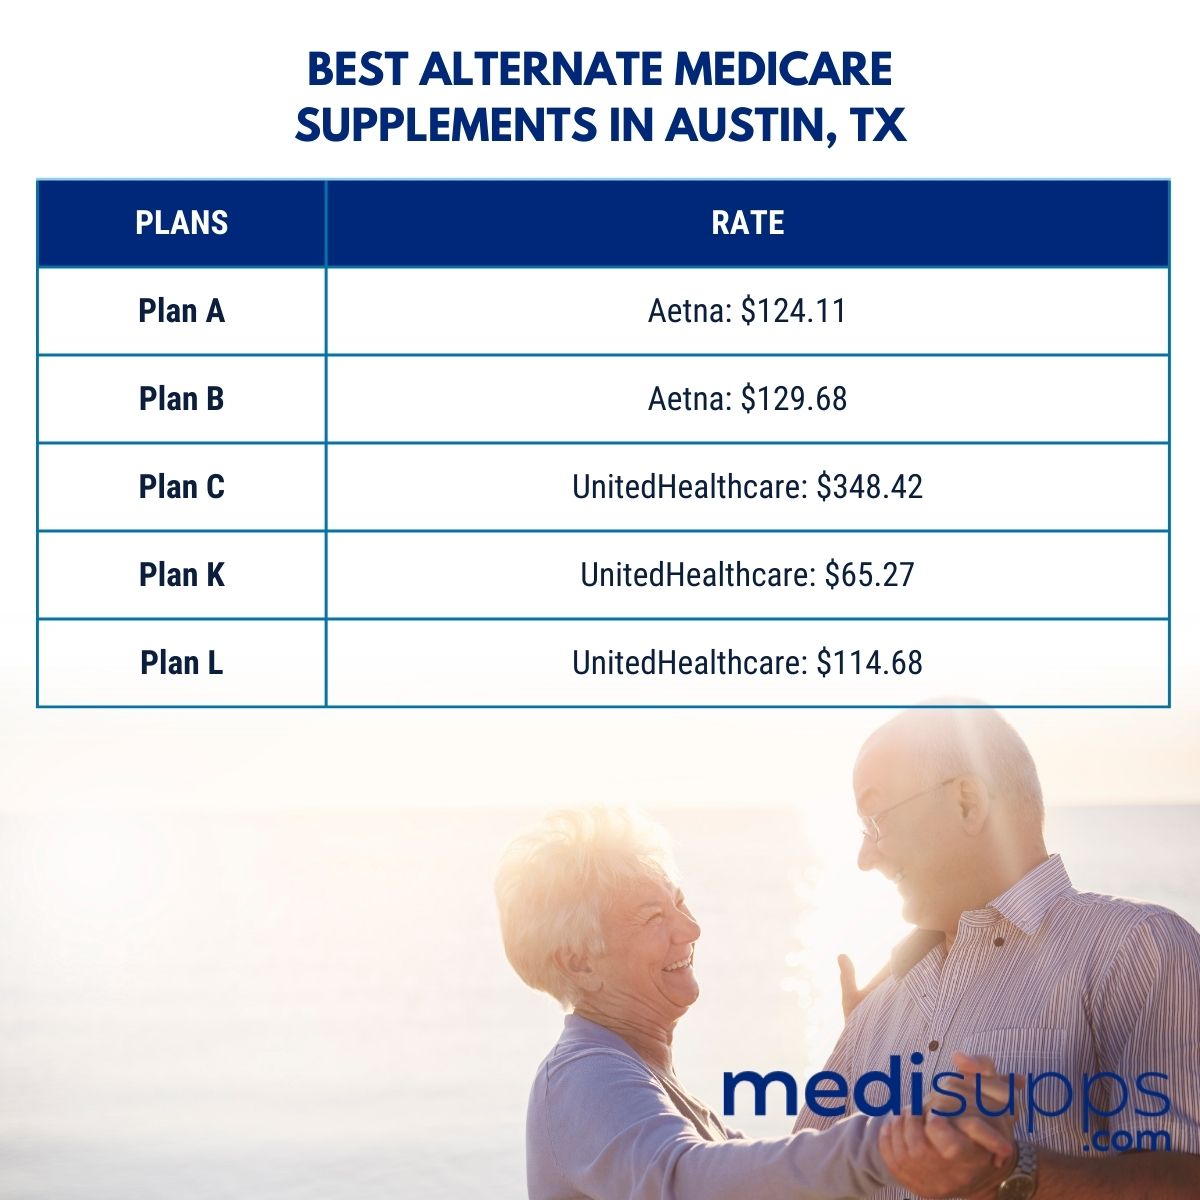 What are the Best Alternate Medicare Supplements in Austin, TX